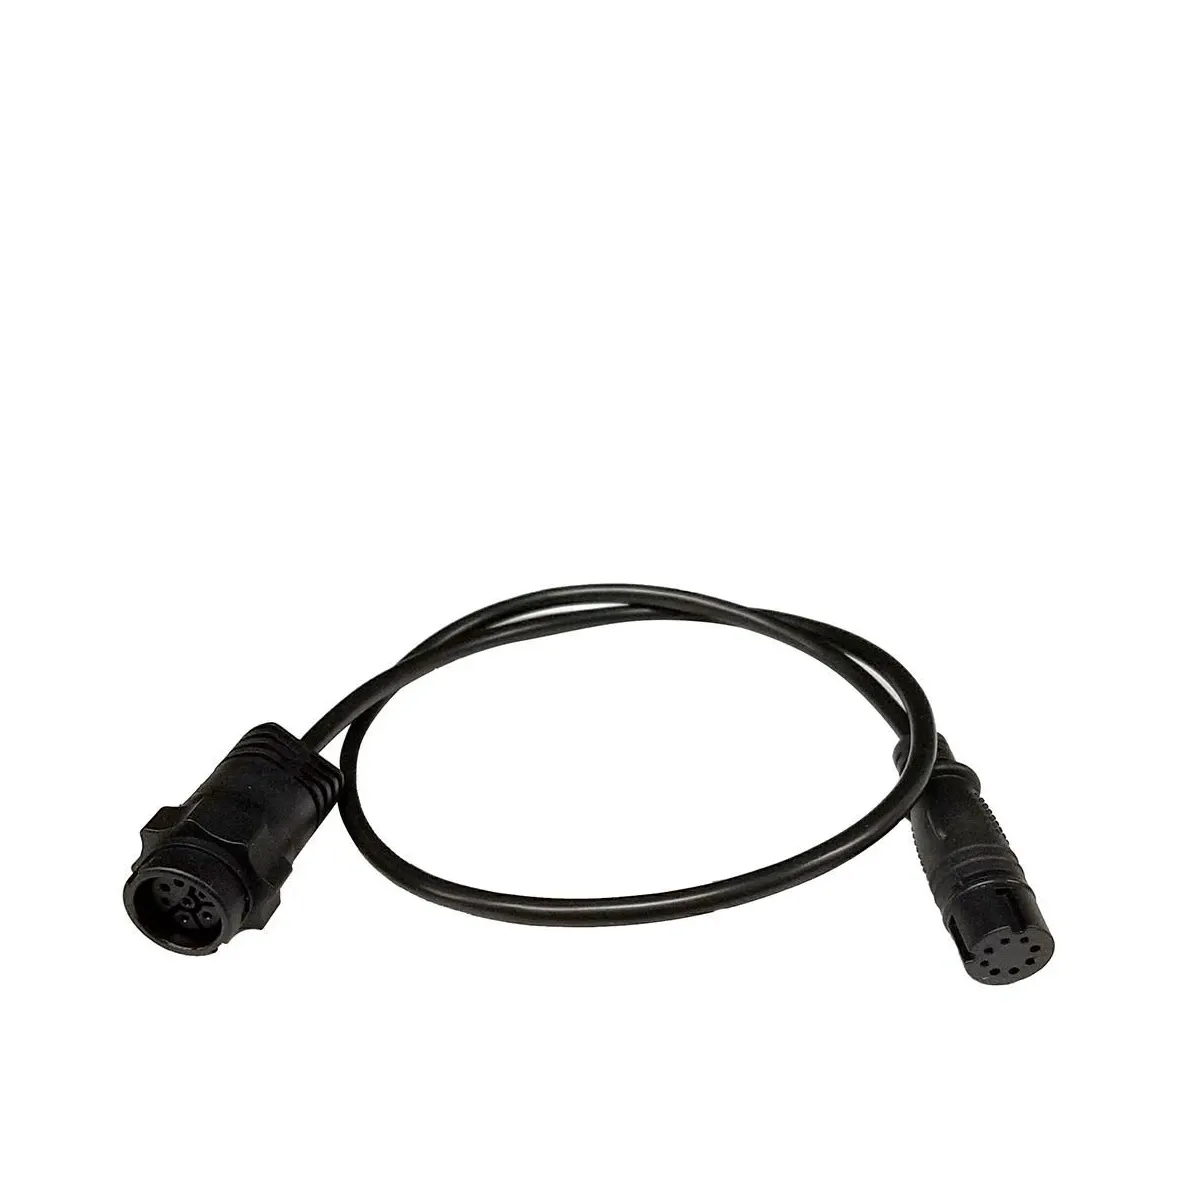 Lowrance 7-pin Transducer Adapter Cable To Hook2